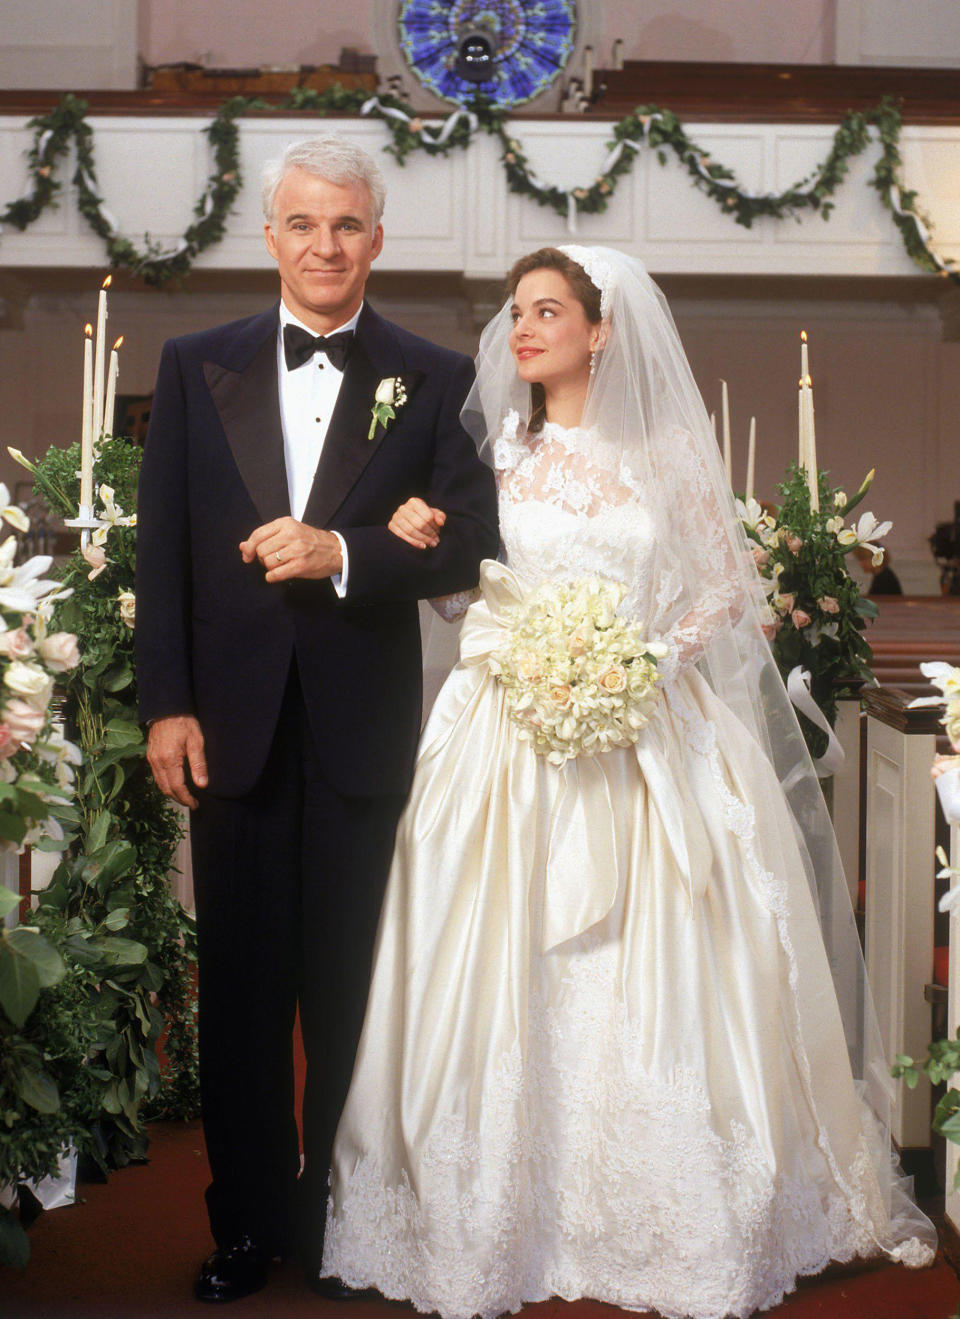 Martin as George Banks walking Kimberly Williams as Annie down the aisle in 